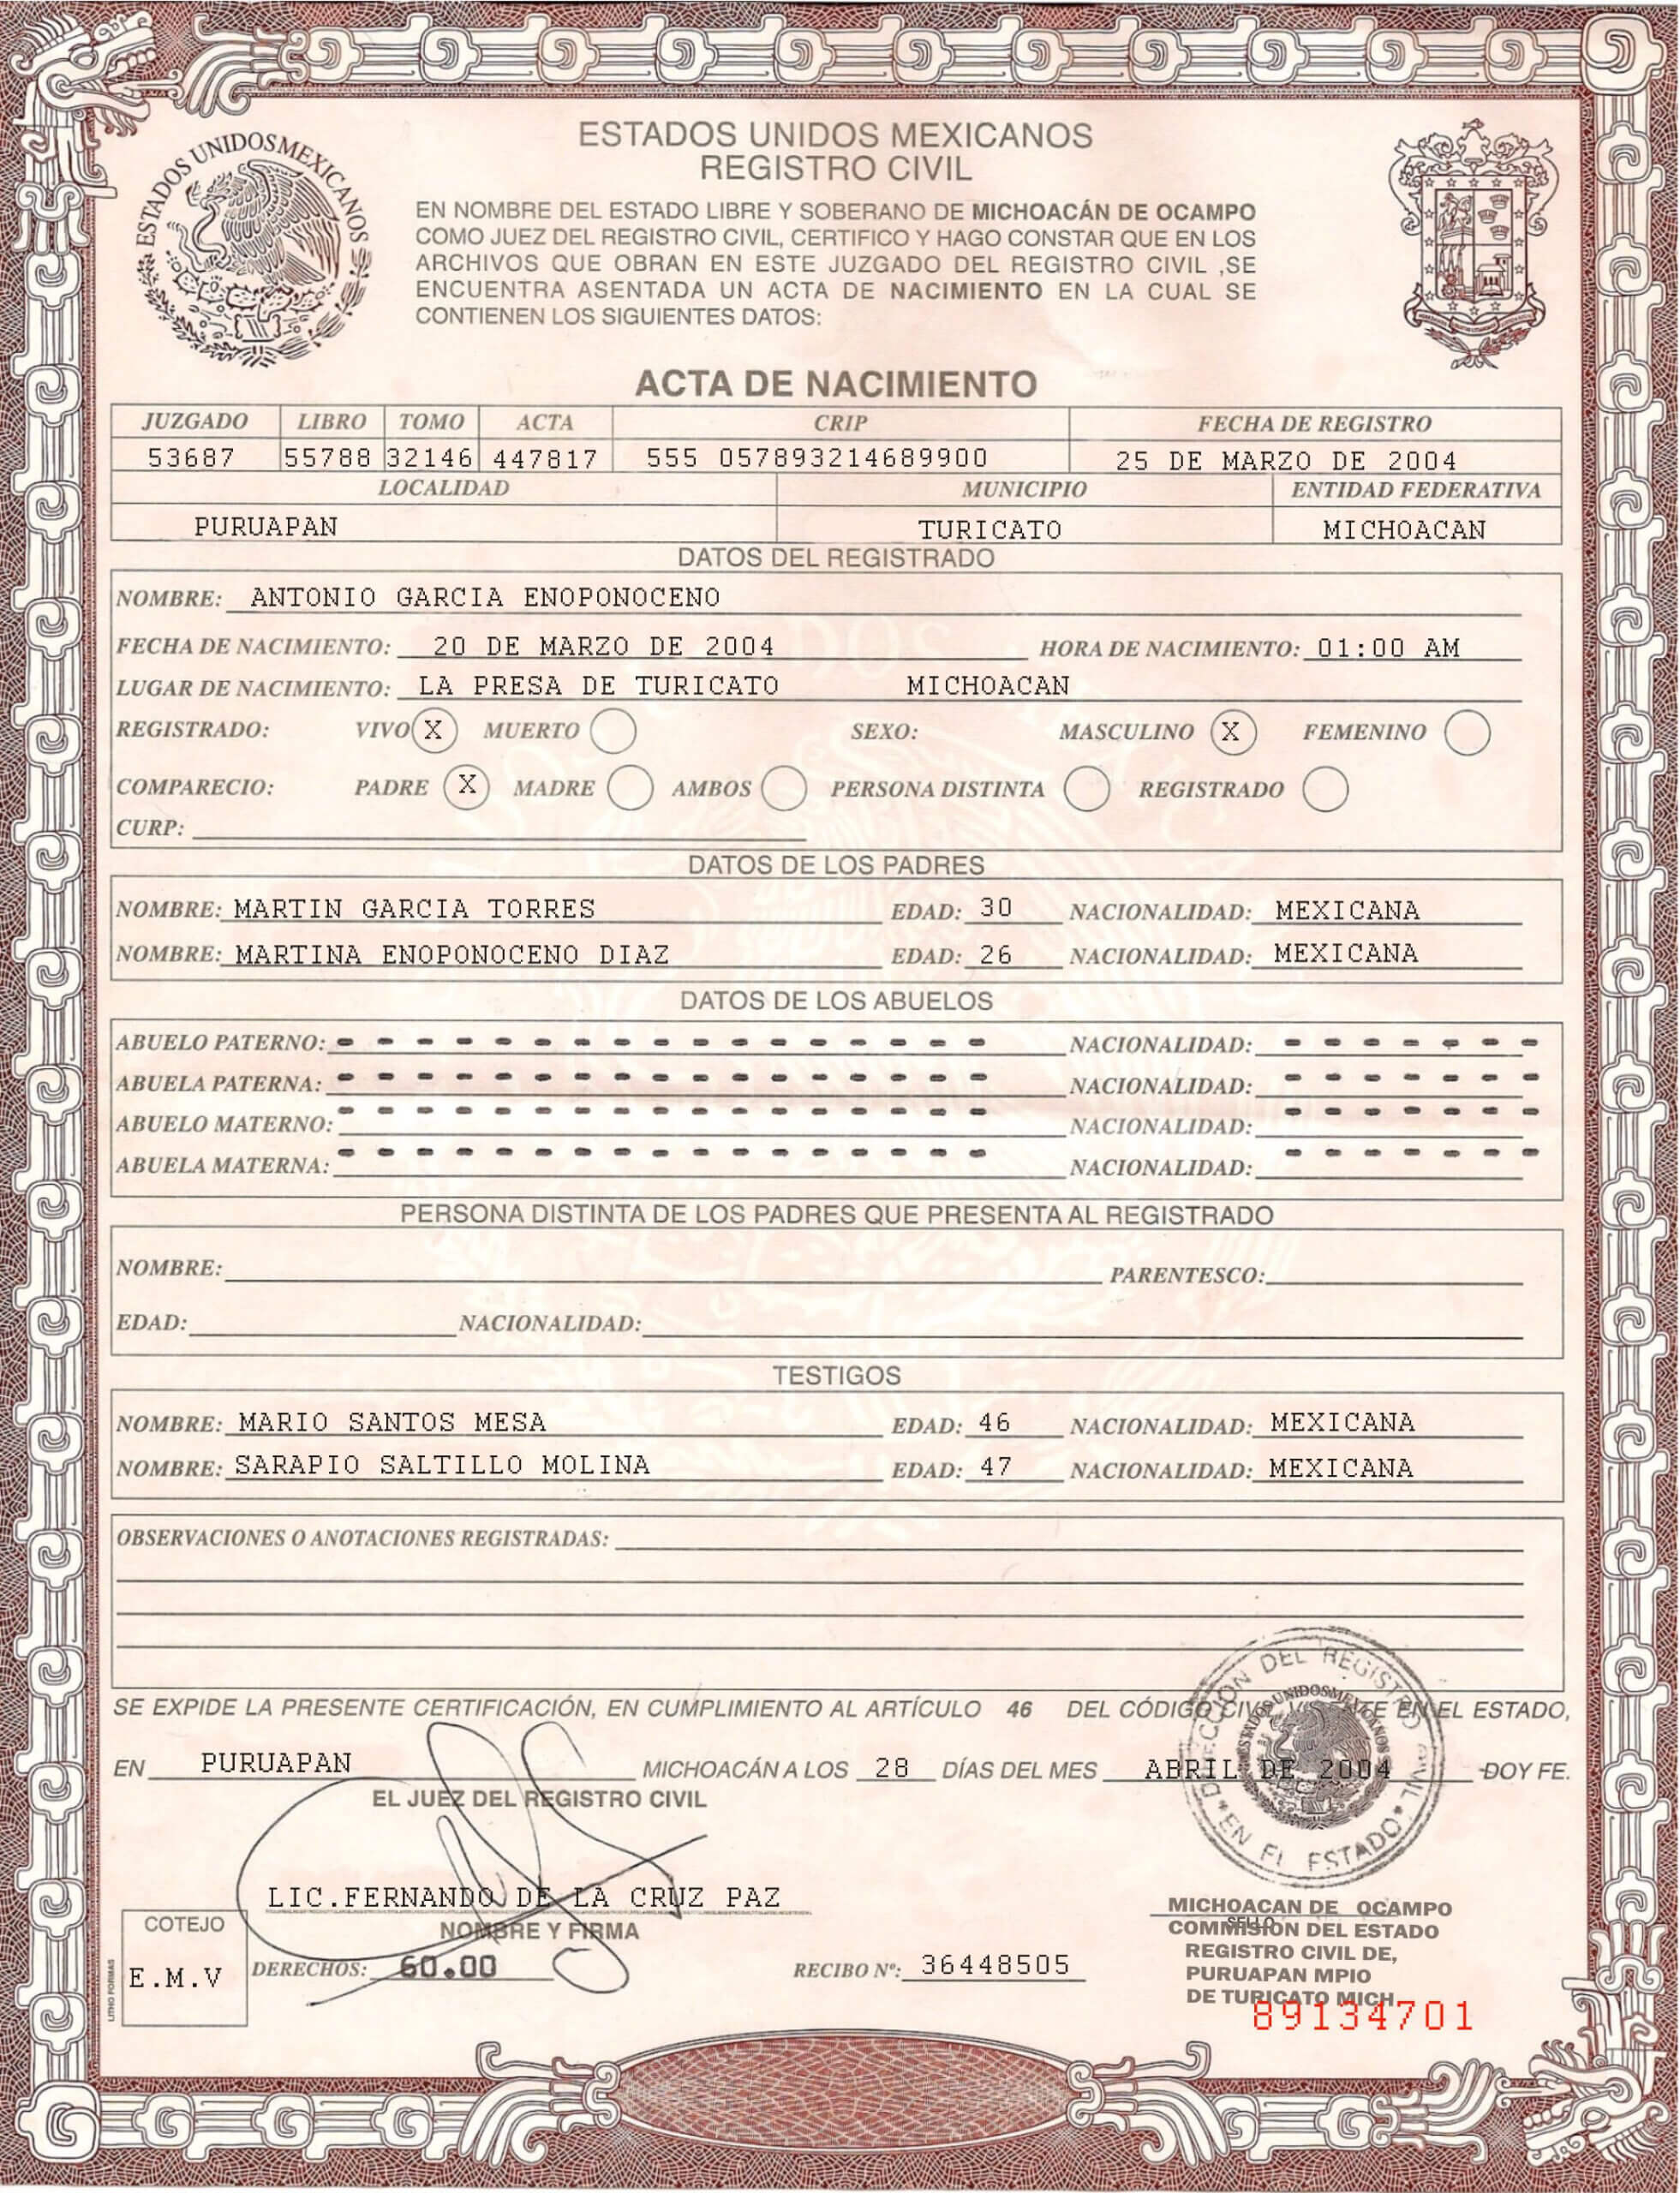 This Is Mexican Birth Certificate Psd (Photoshop) Template Intended For Novelty Birth Certificate Template